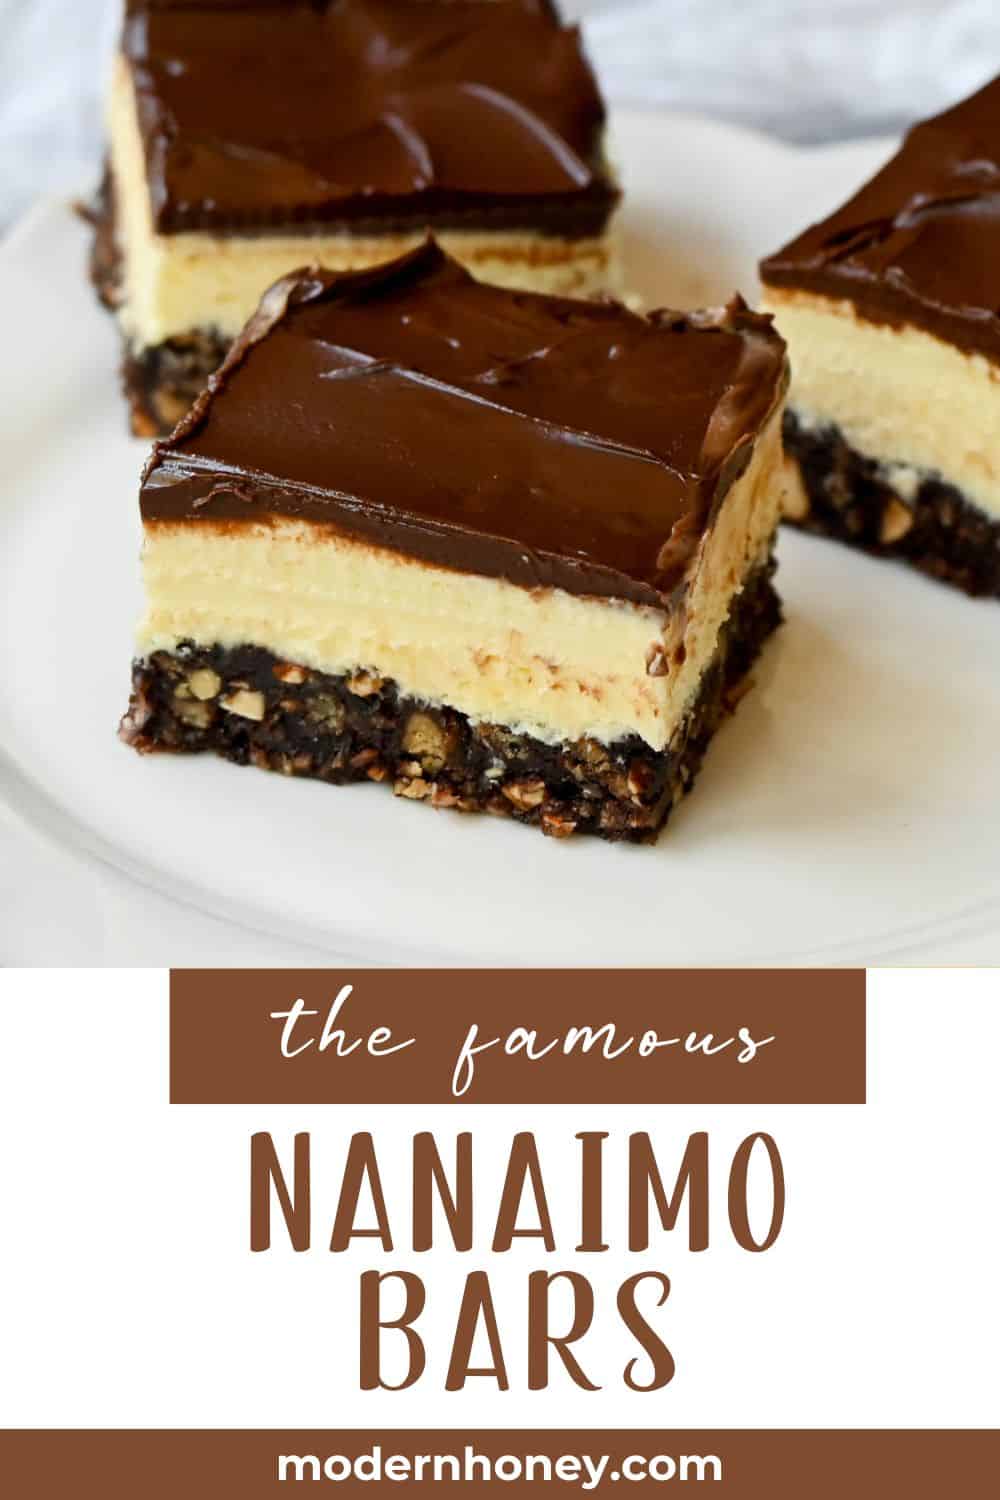 Rich and fudgy Nanaimo bars are the perfect no-bake dessert. A chocolate, graham cracker, almond, and coconut base layer is topped with a creamy custard filling and chocolate ganache. You’ll be hooked on this classic Canadian treat!